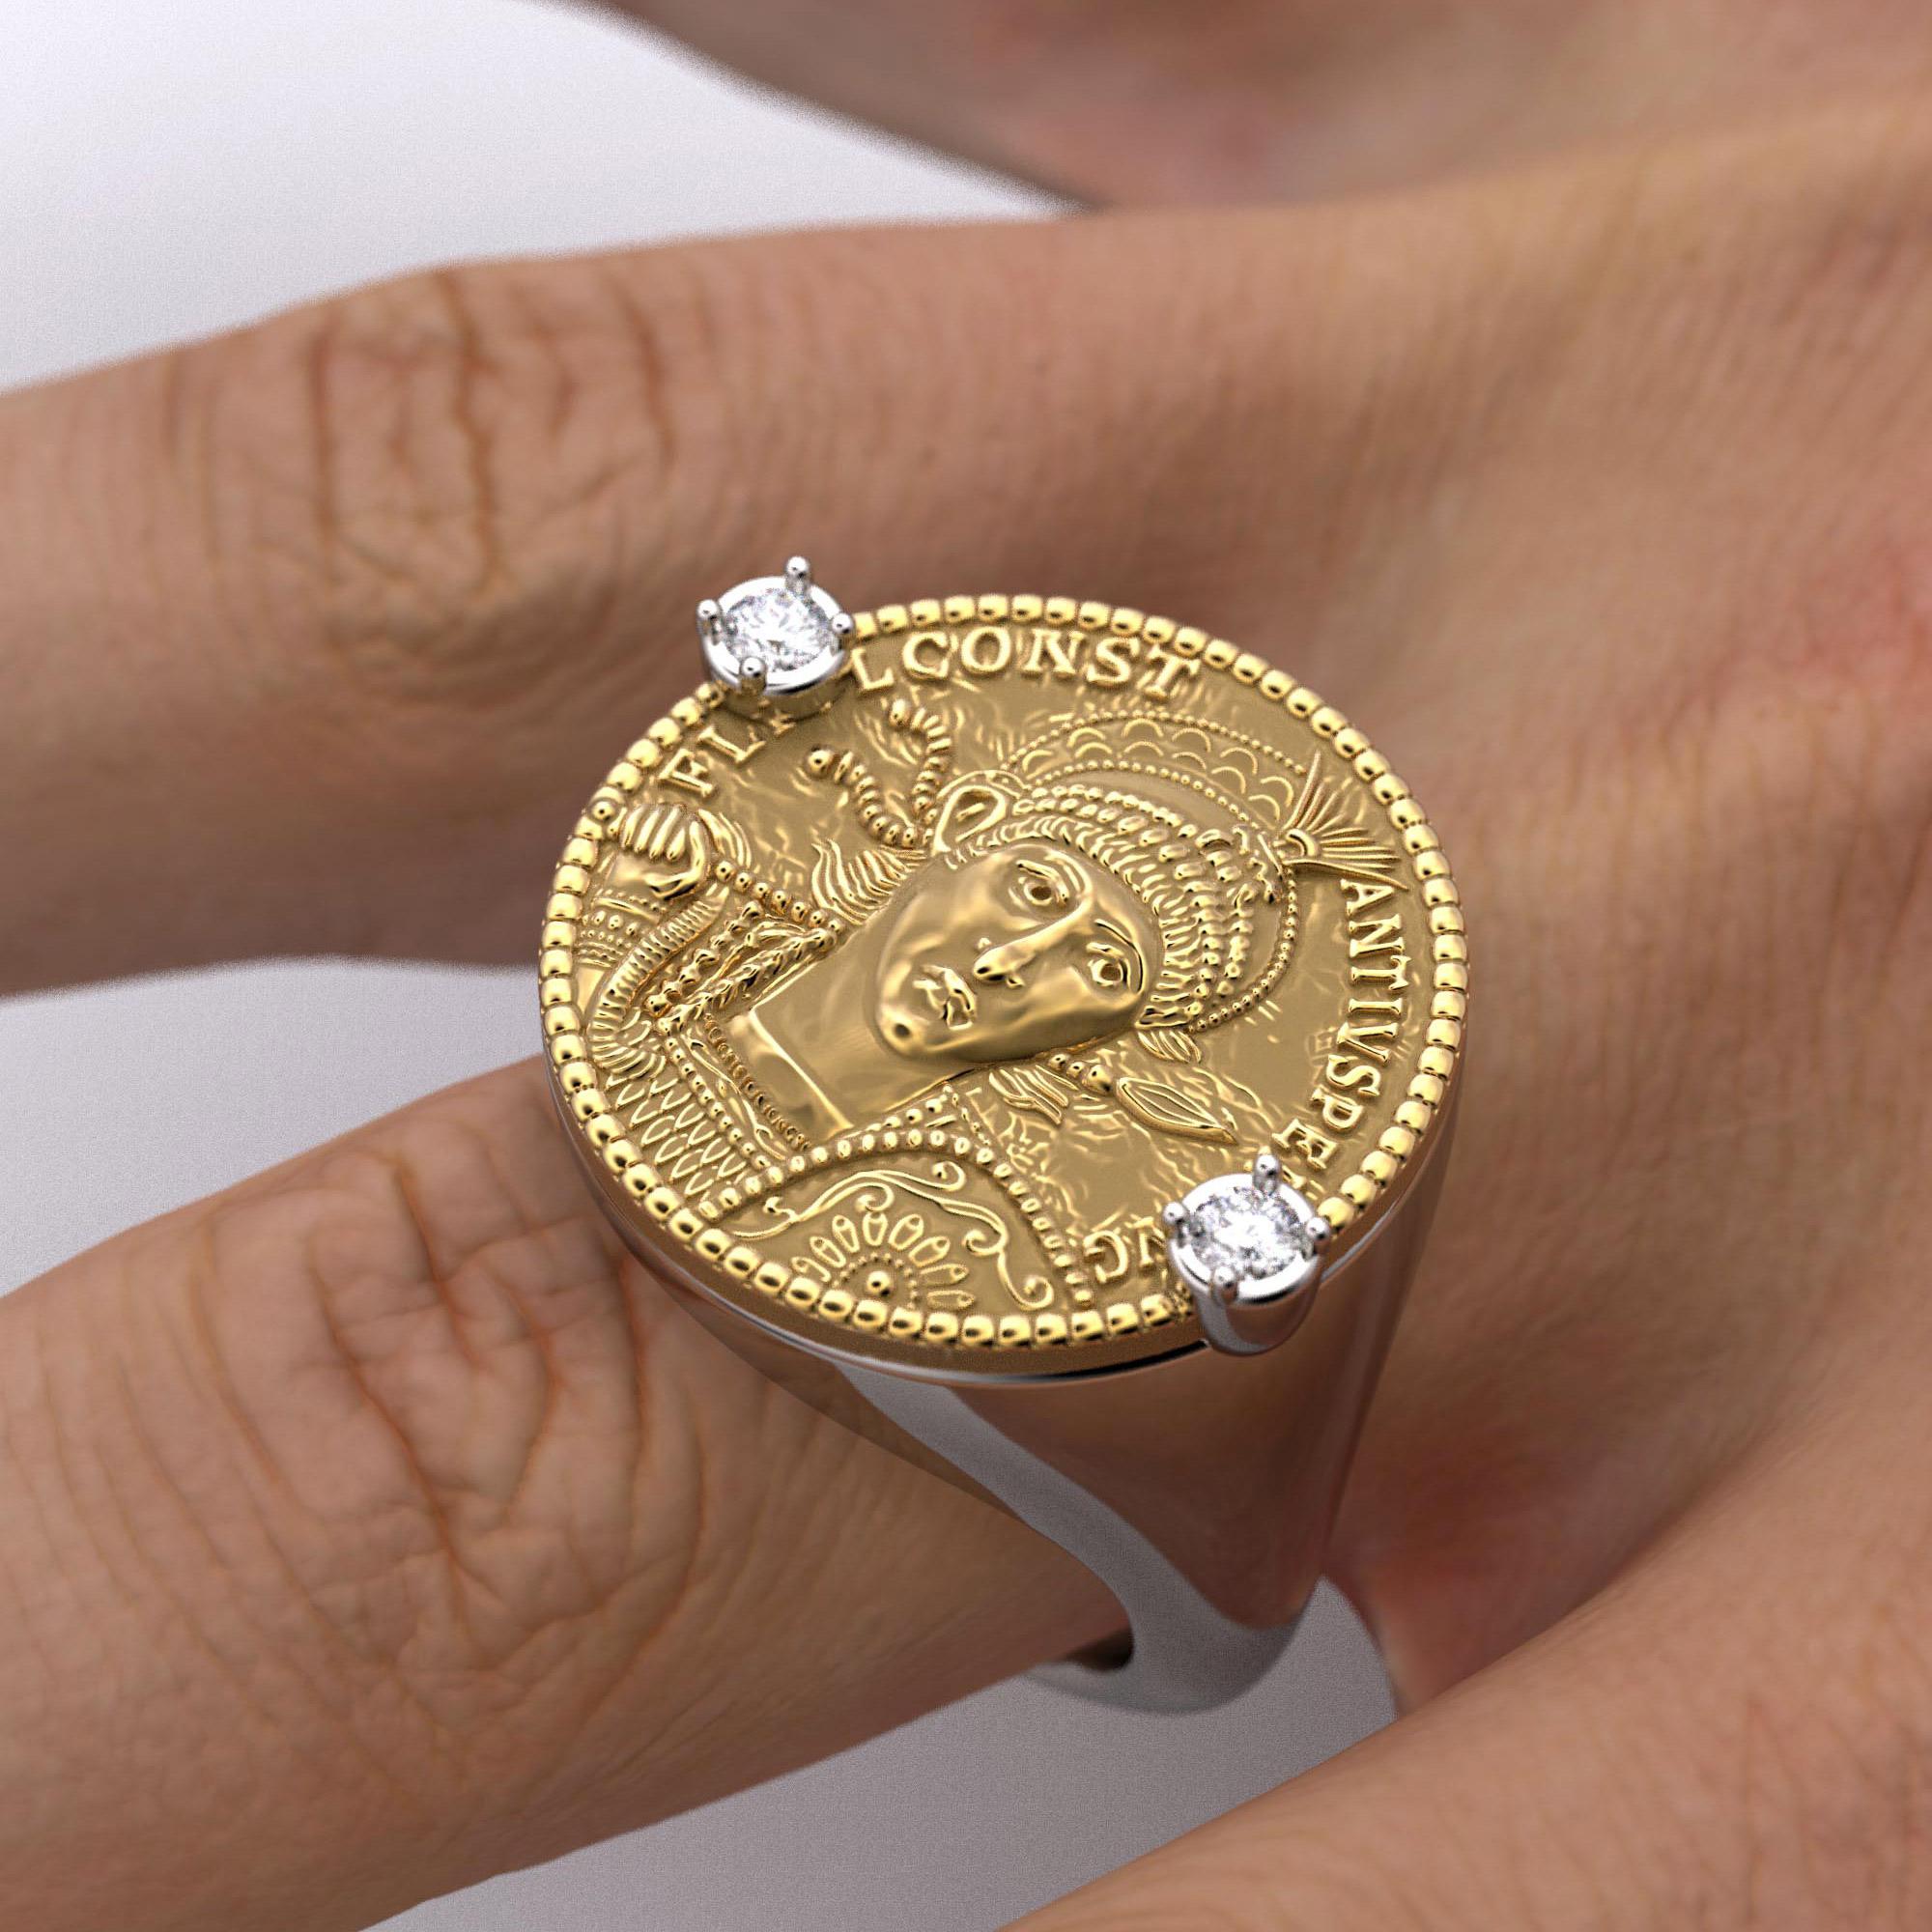 For Sale:  18k Ancient Roman Style Gold Coin Ring with a reproduction of a Roman Solidus 4